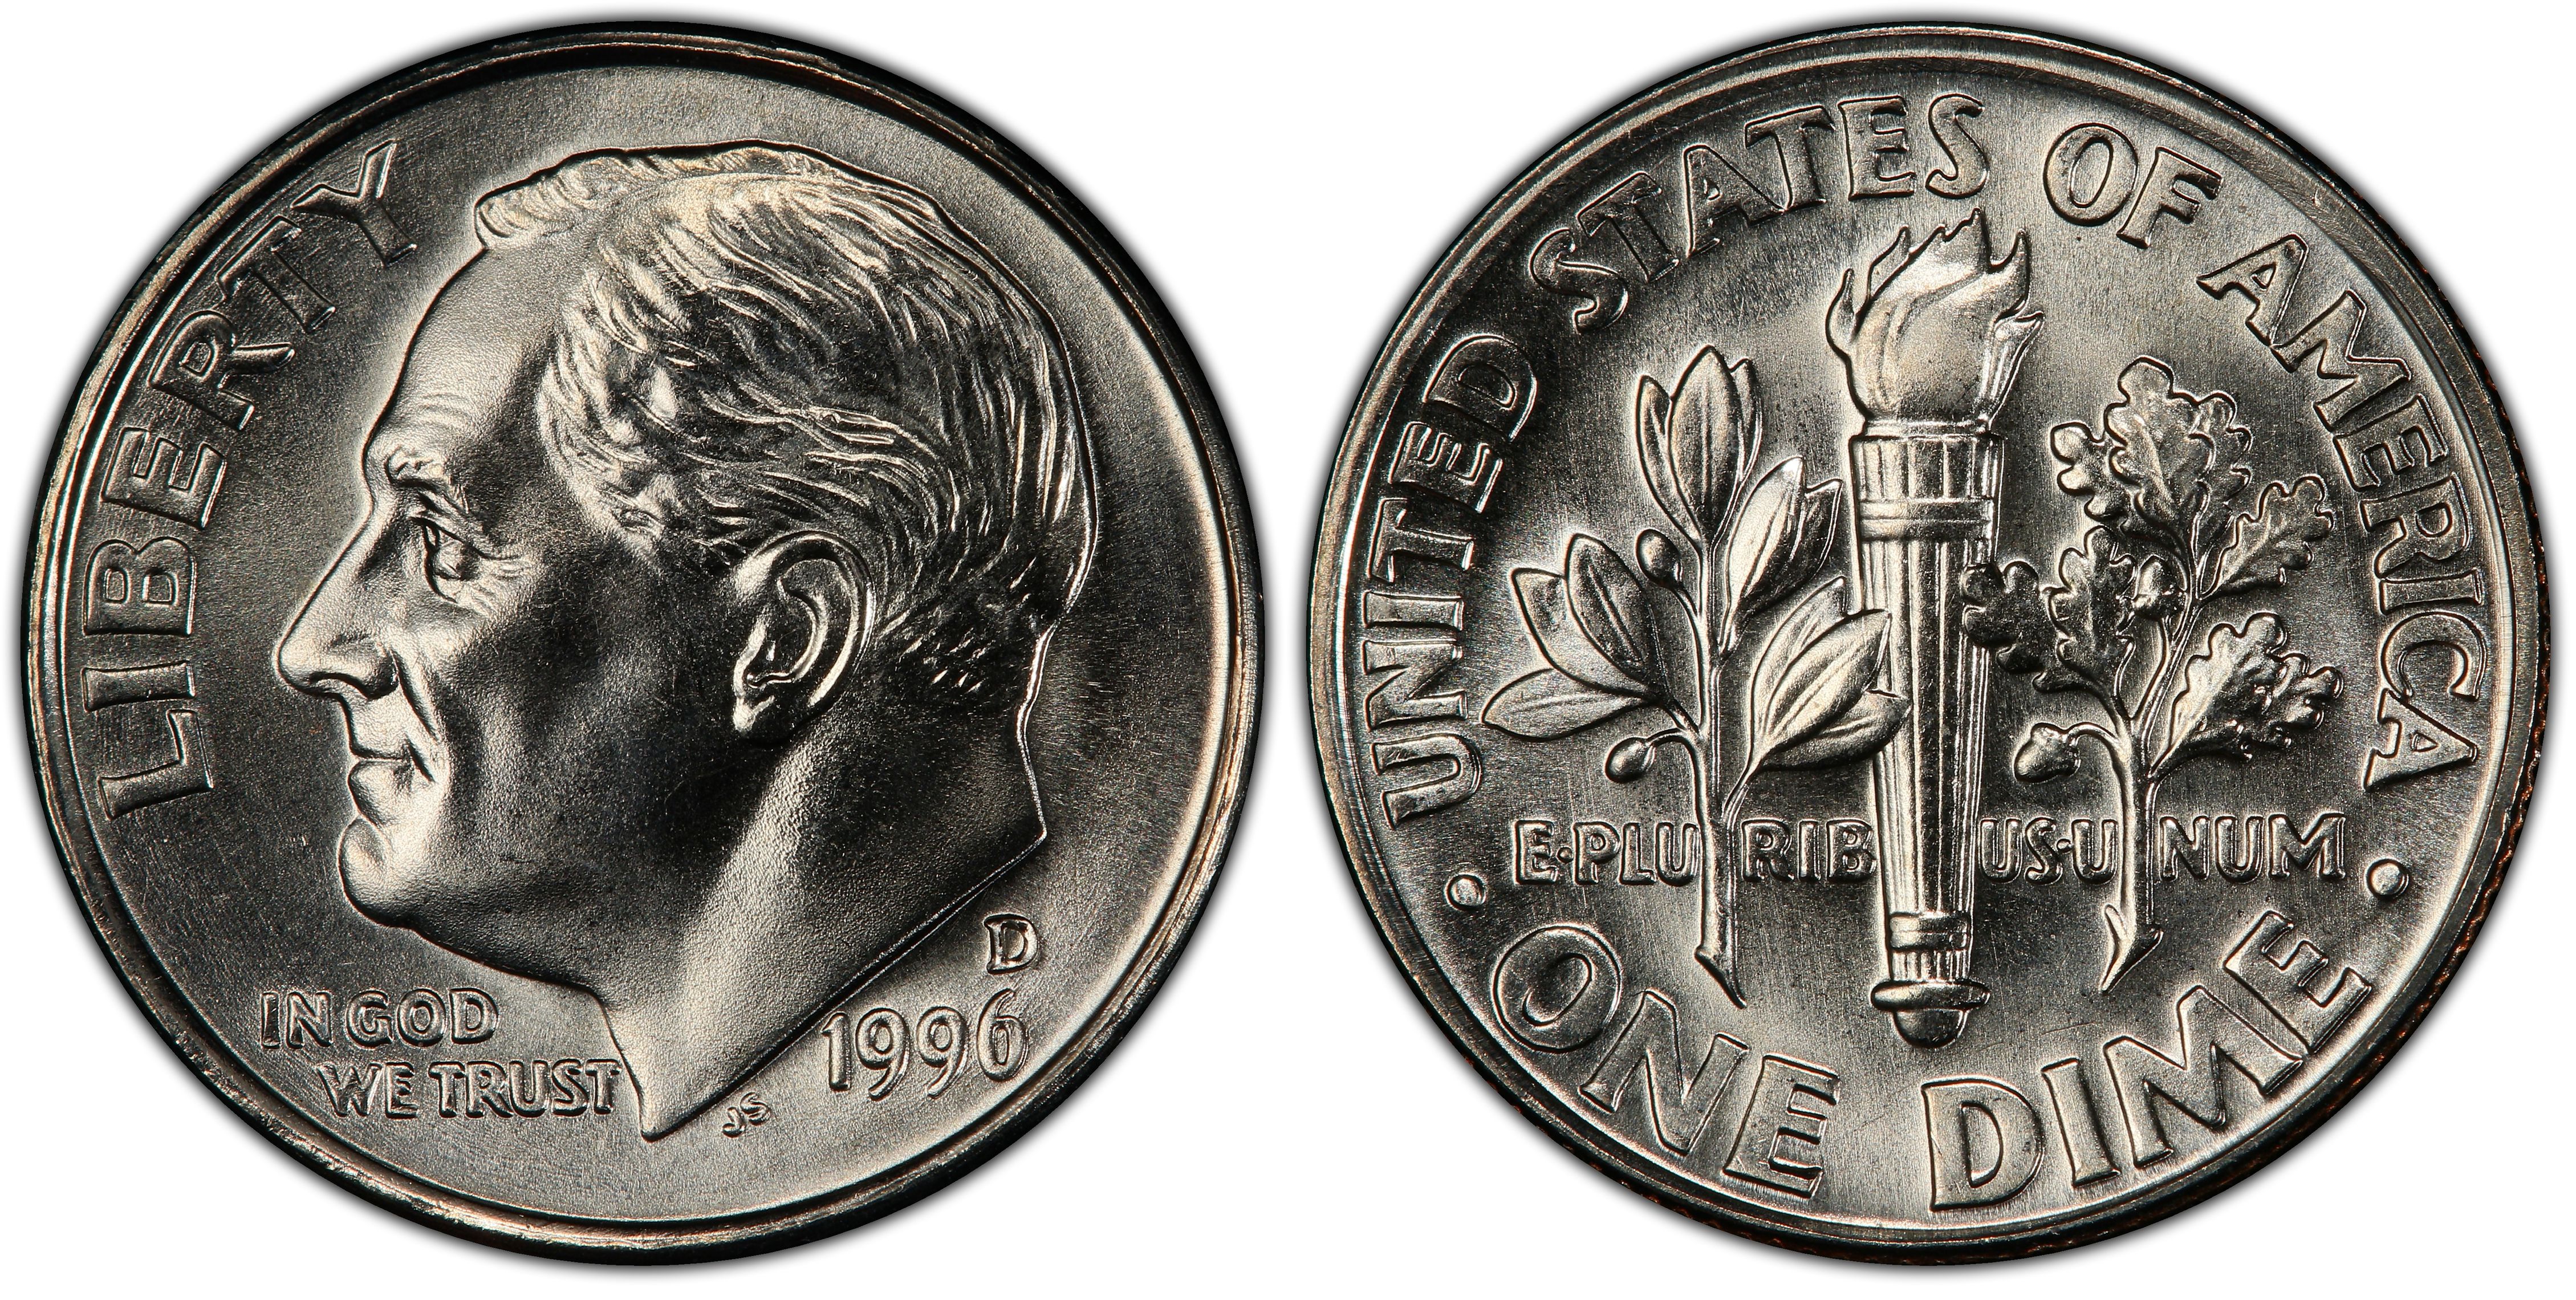 Details about   1996 S Proof Roosevelt Dime 